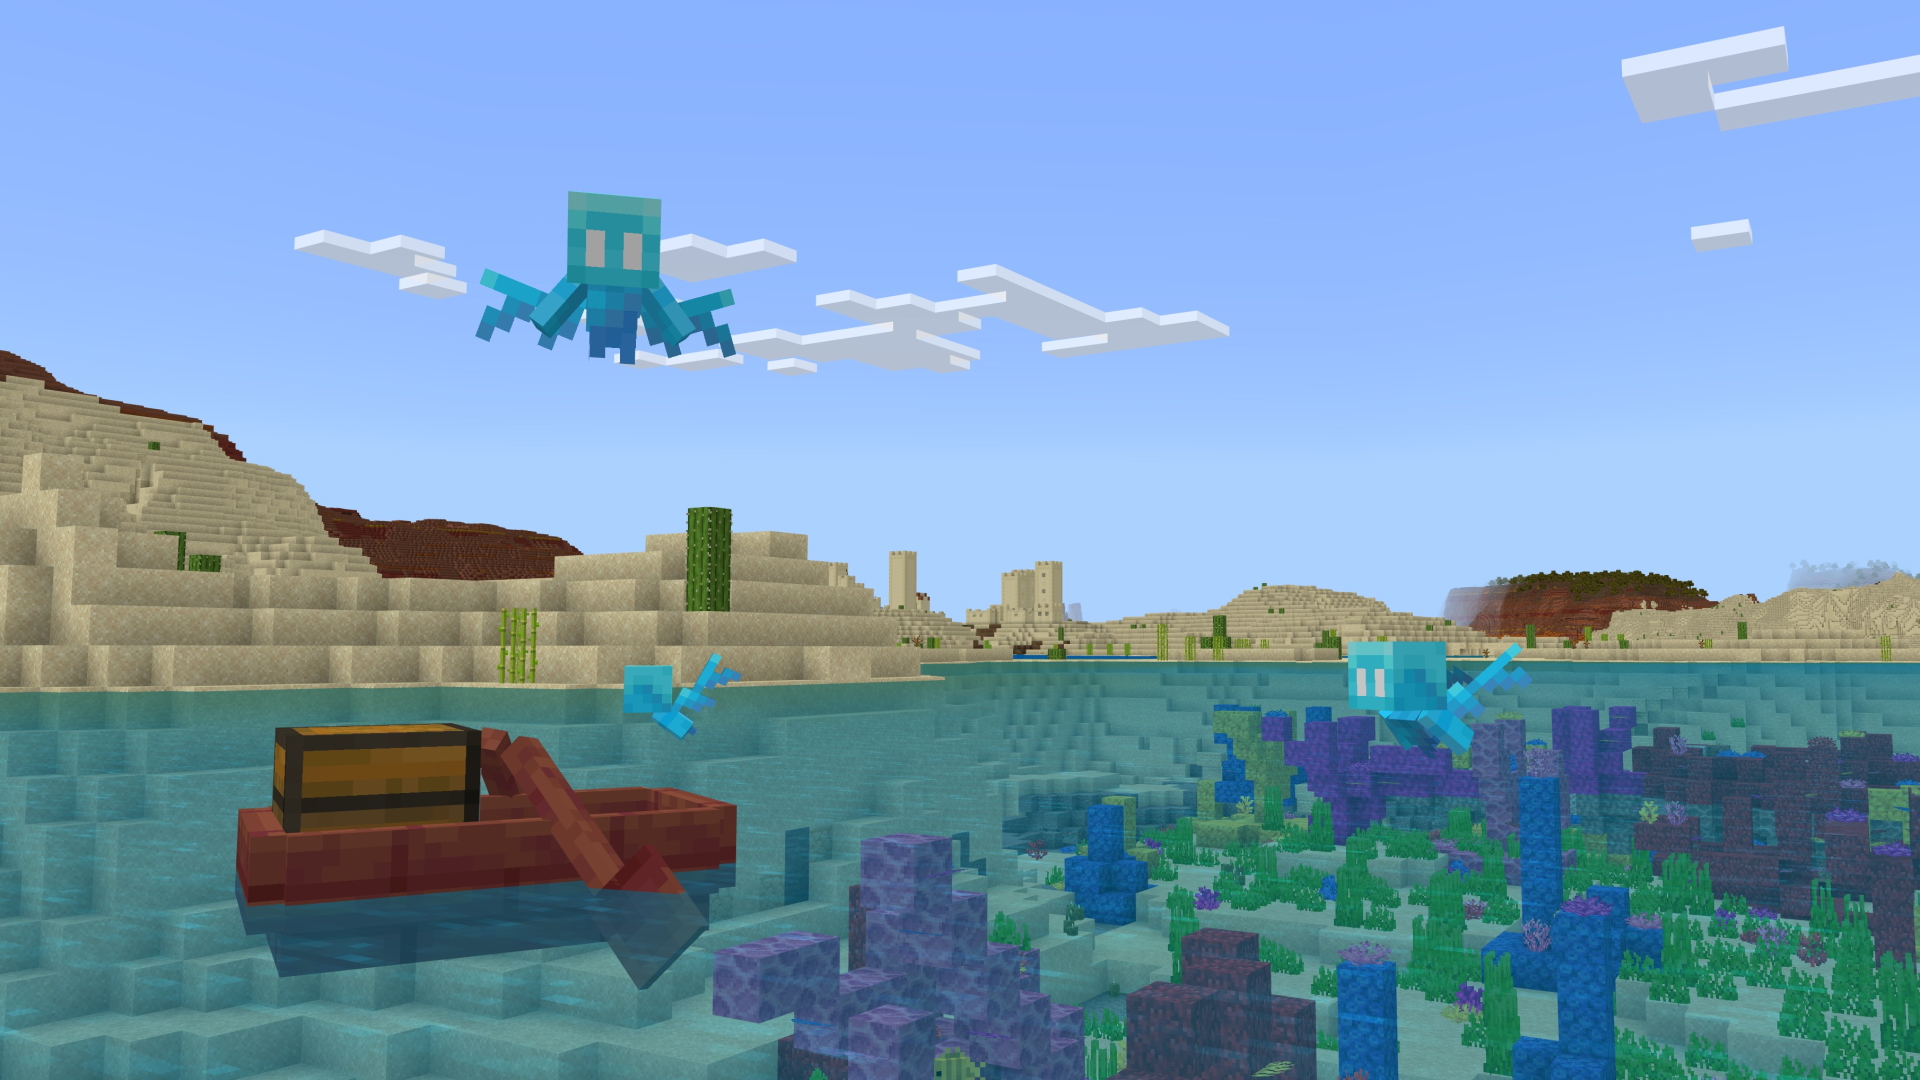 A Minecraft screenshot featuring a chestboat and allays